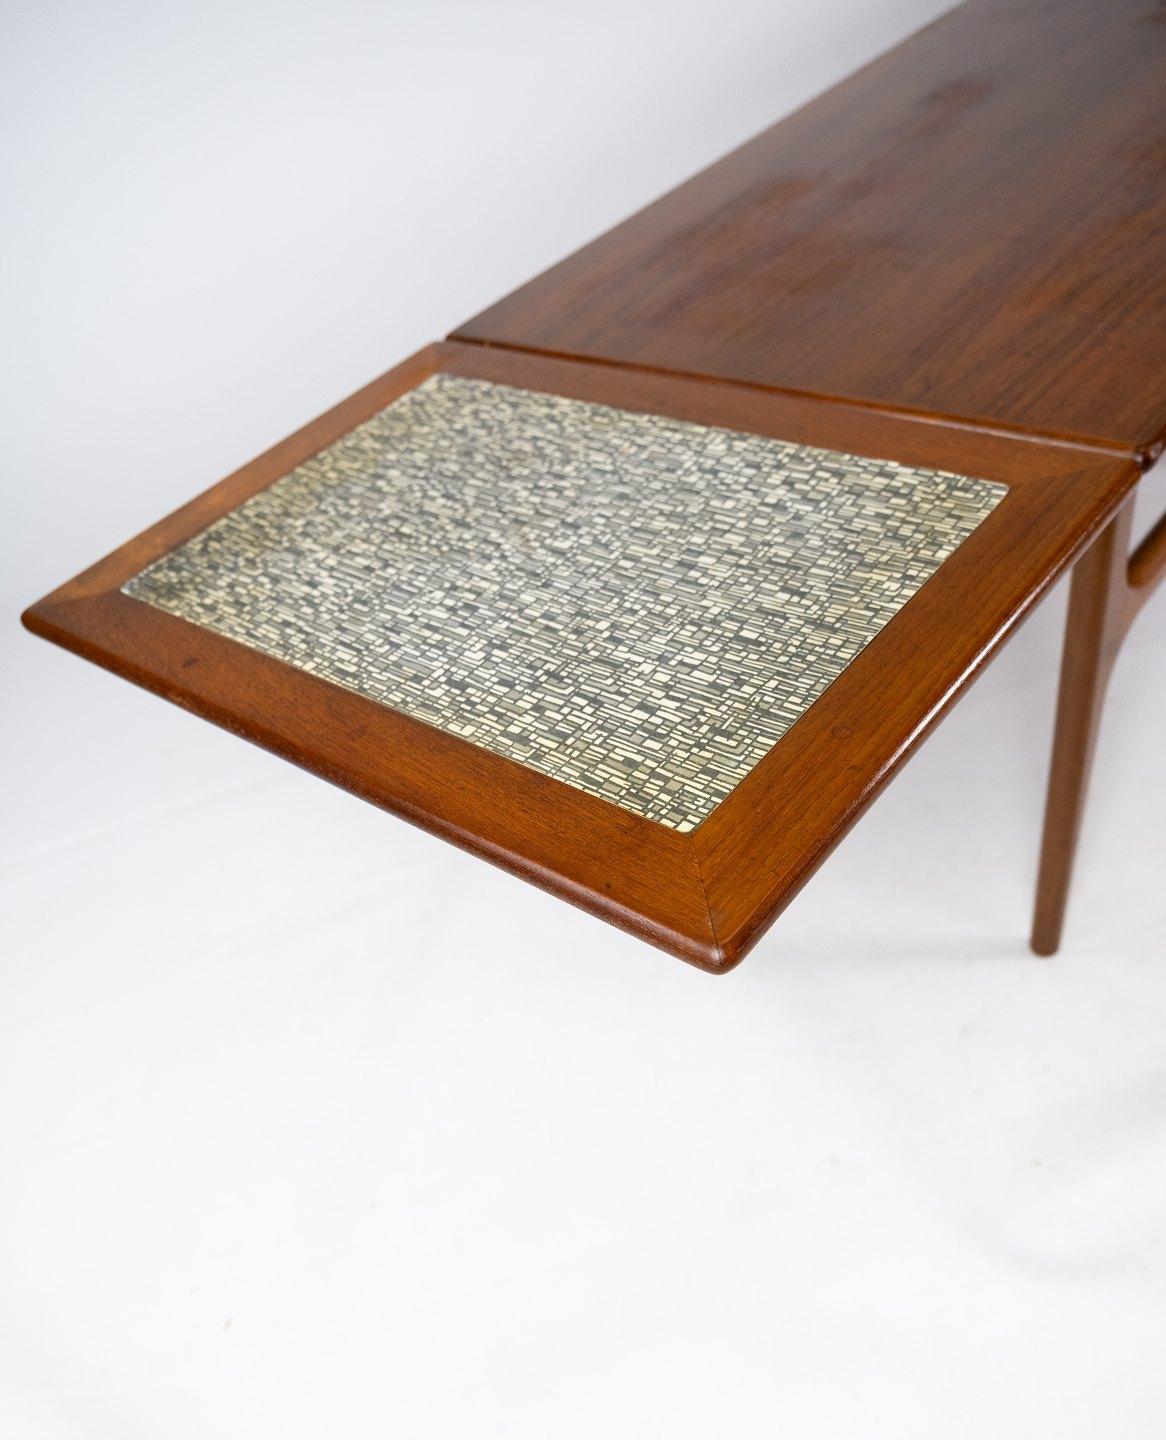 Scandinavian Modern Coffee Table in Teak with Extensions of Danish Design from the 1960s